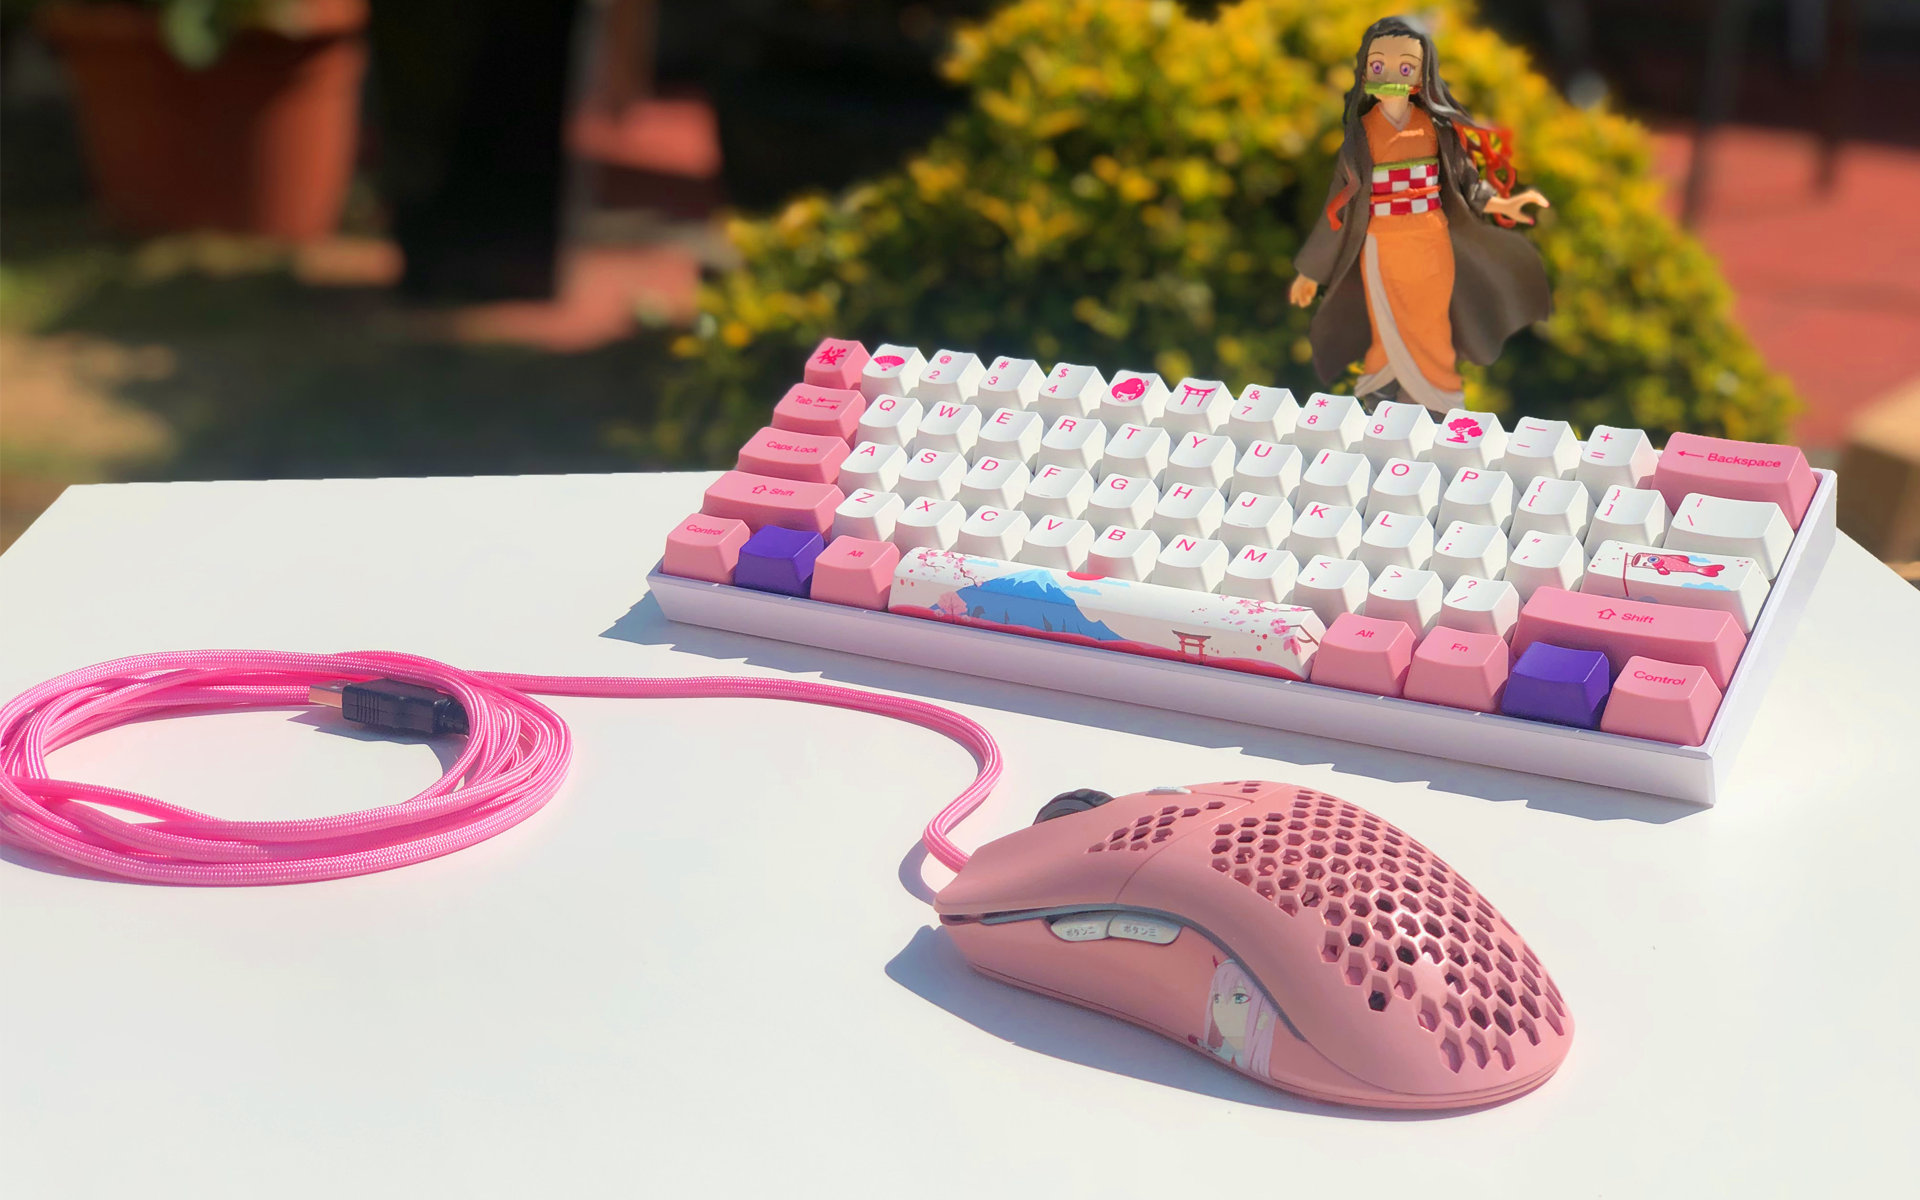 Modded Glorious Model O with Paracord |